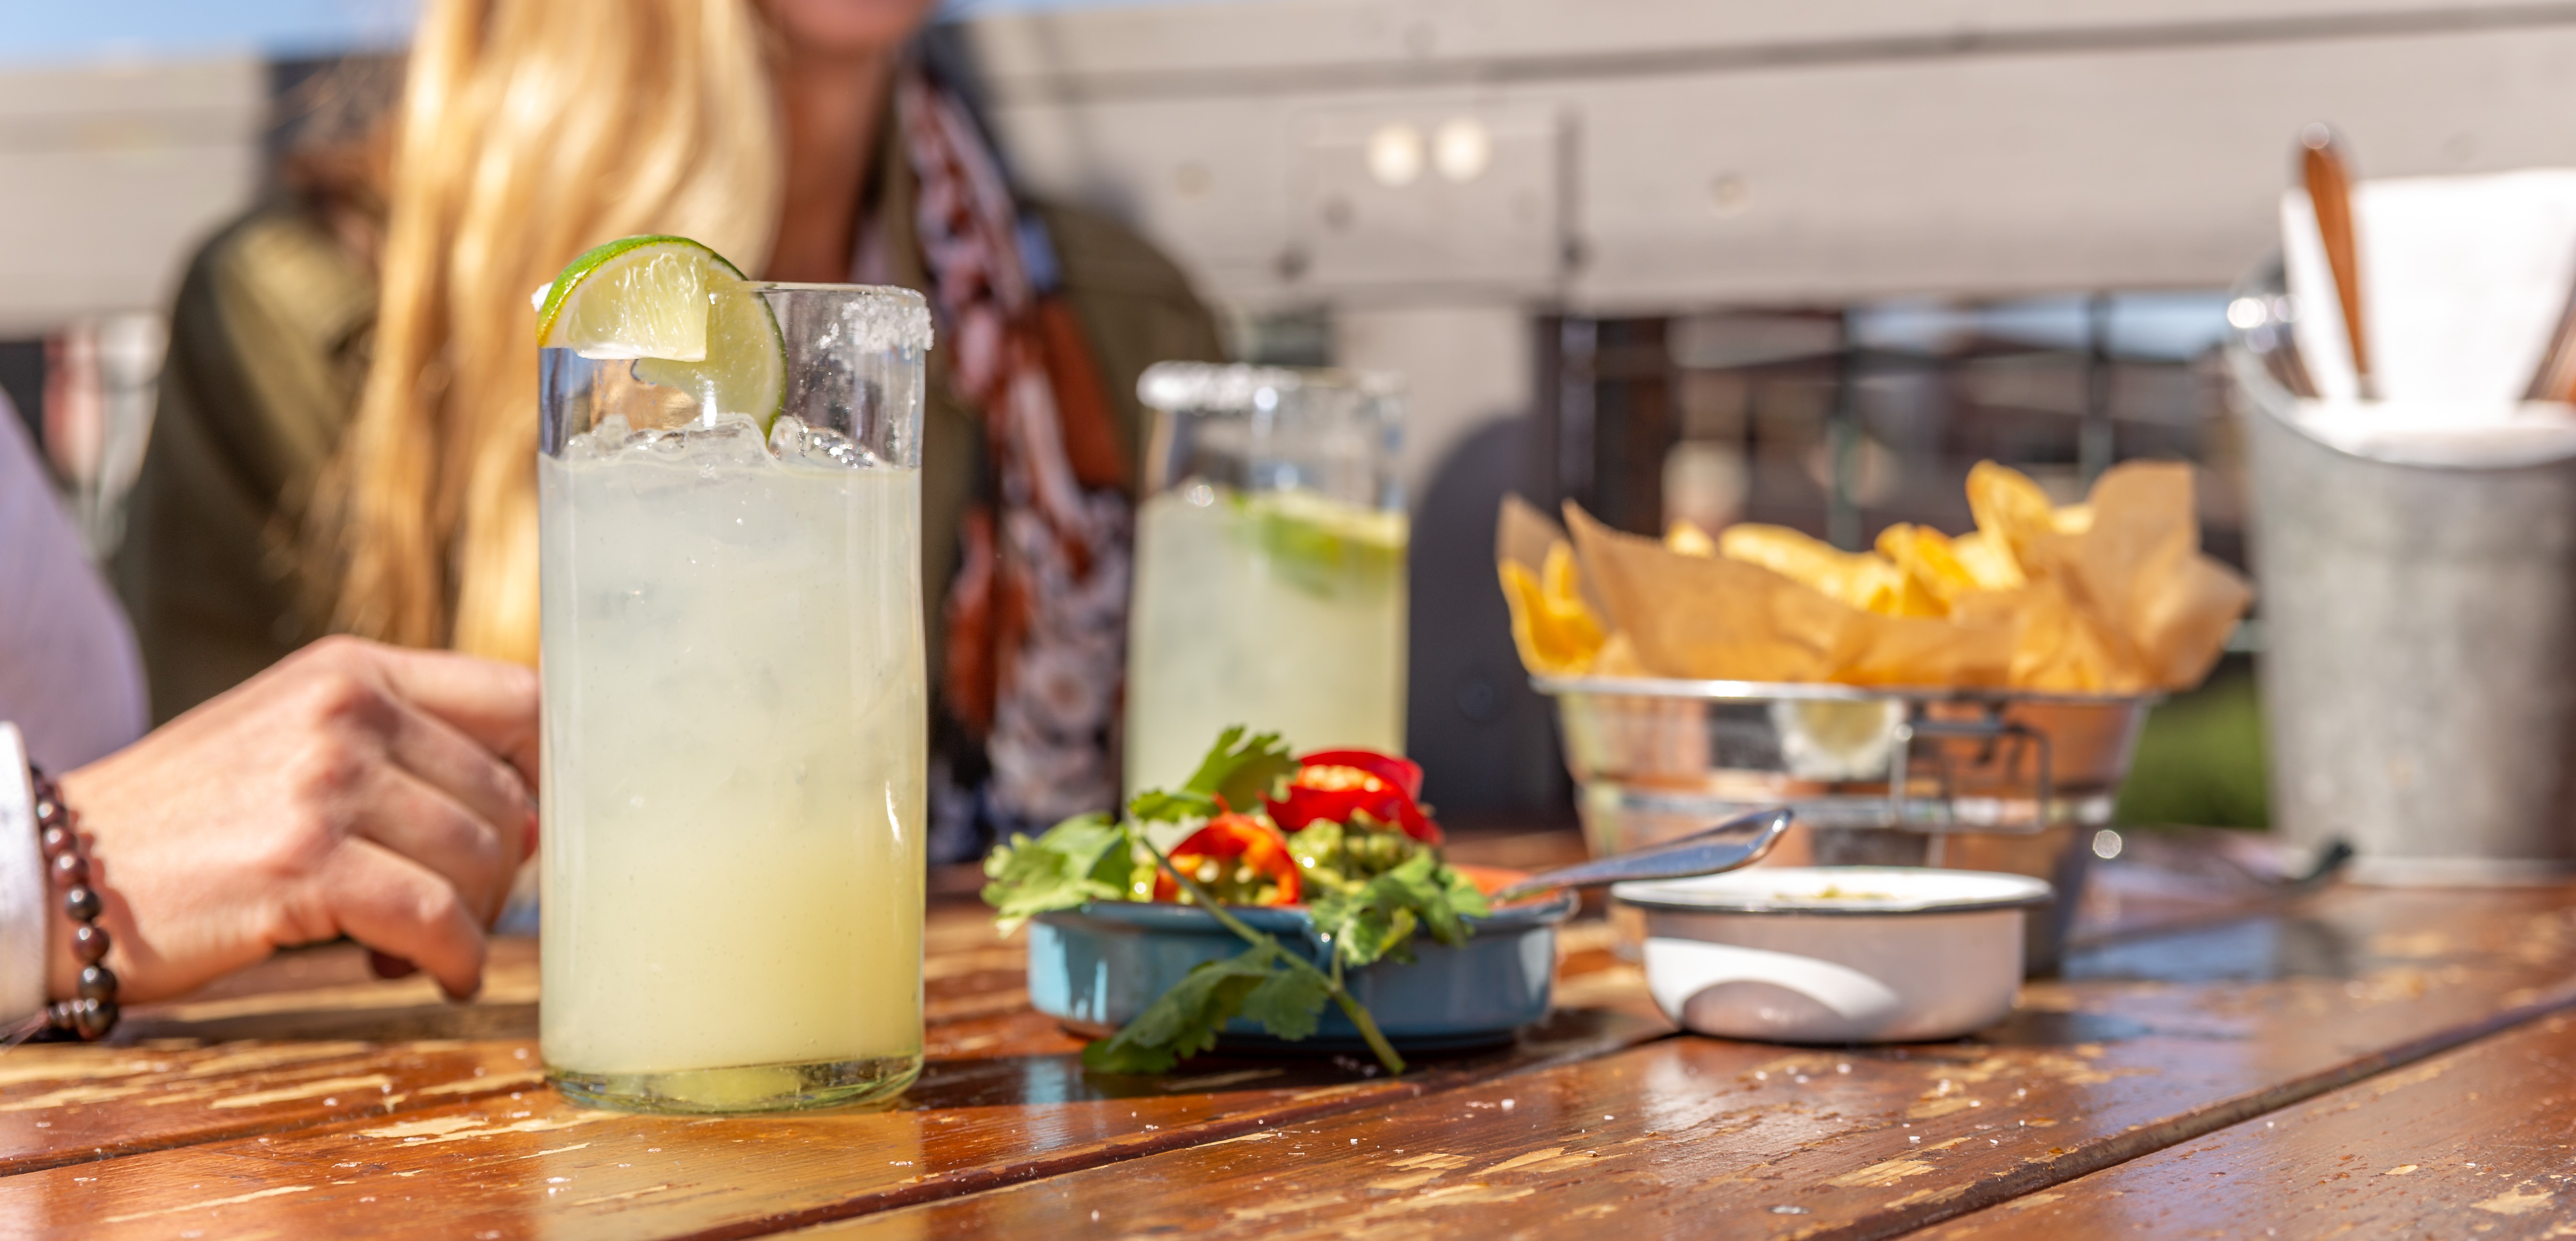 Salt and Lime serves up authentic Mexican eats in downtown Steamboat Springs, Colorado.